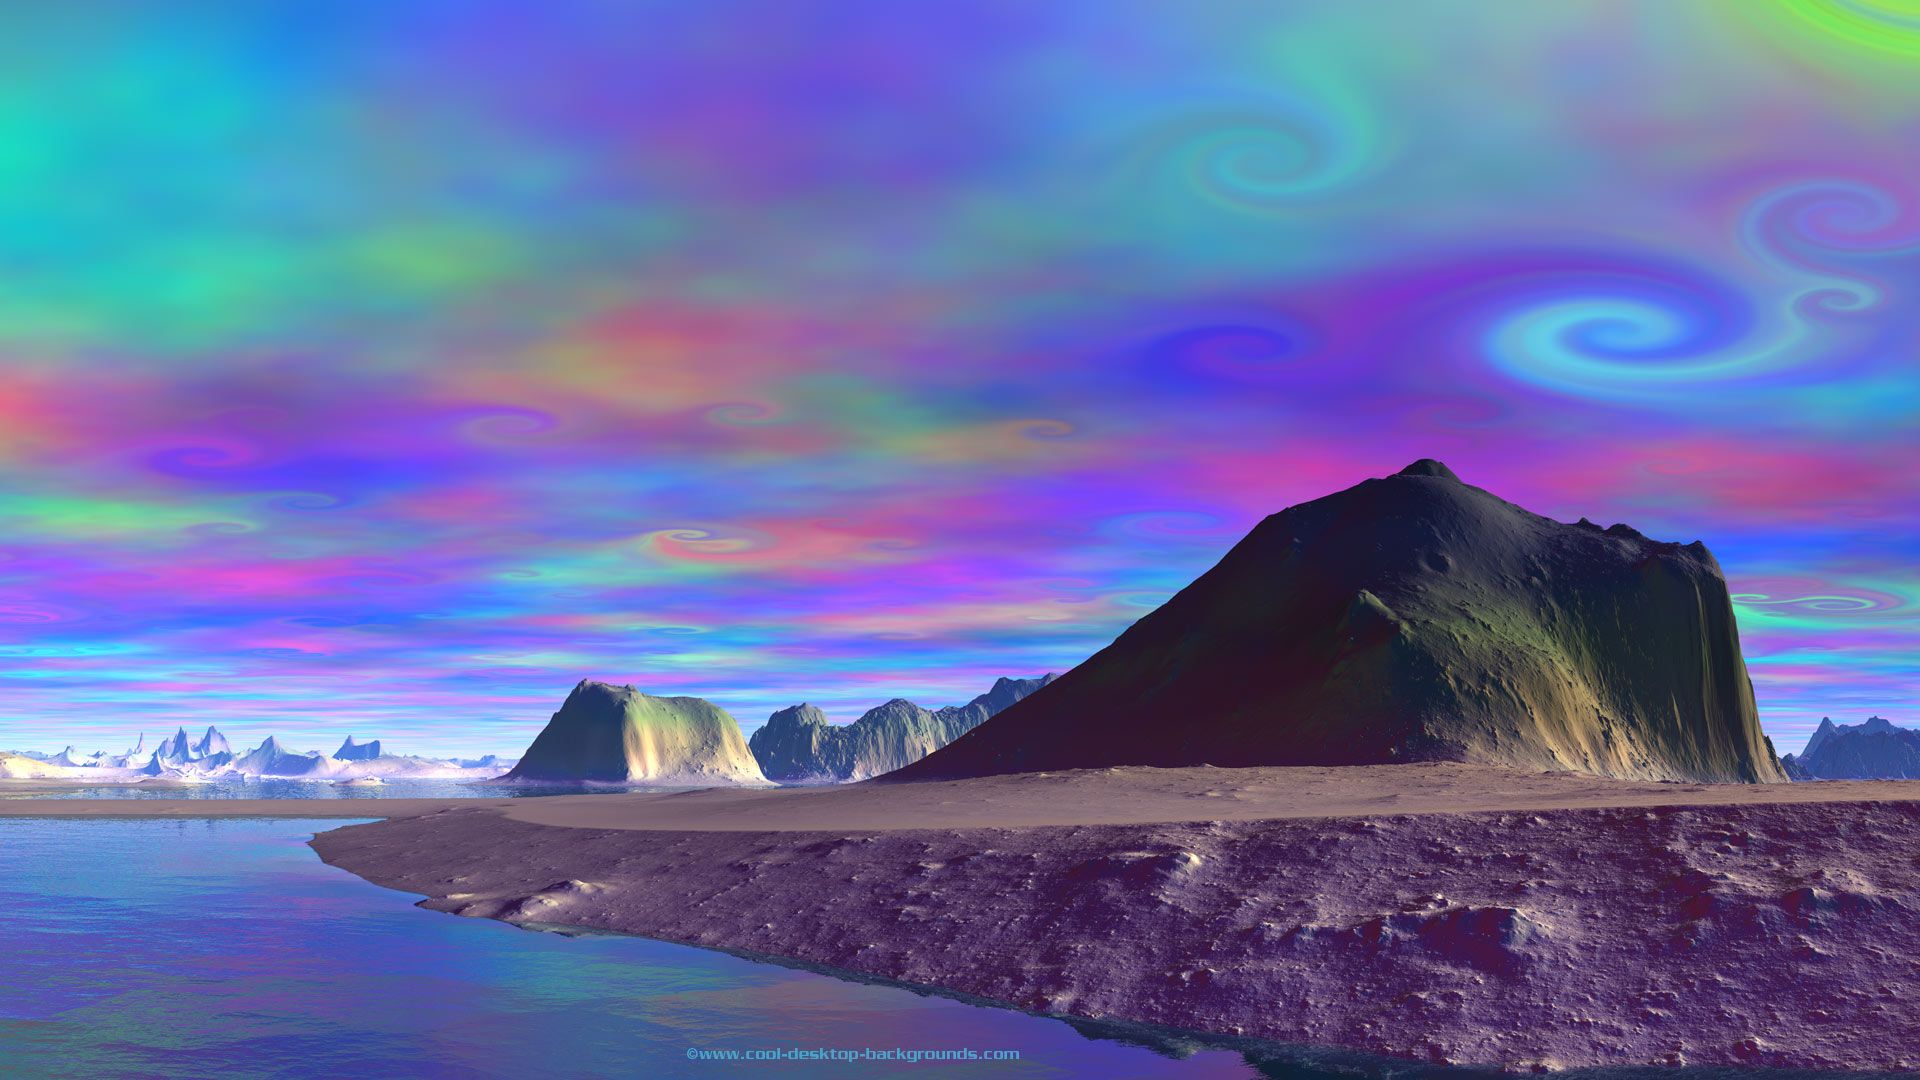 Trippy Psychedelic The Sky Background Desert